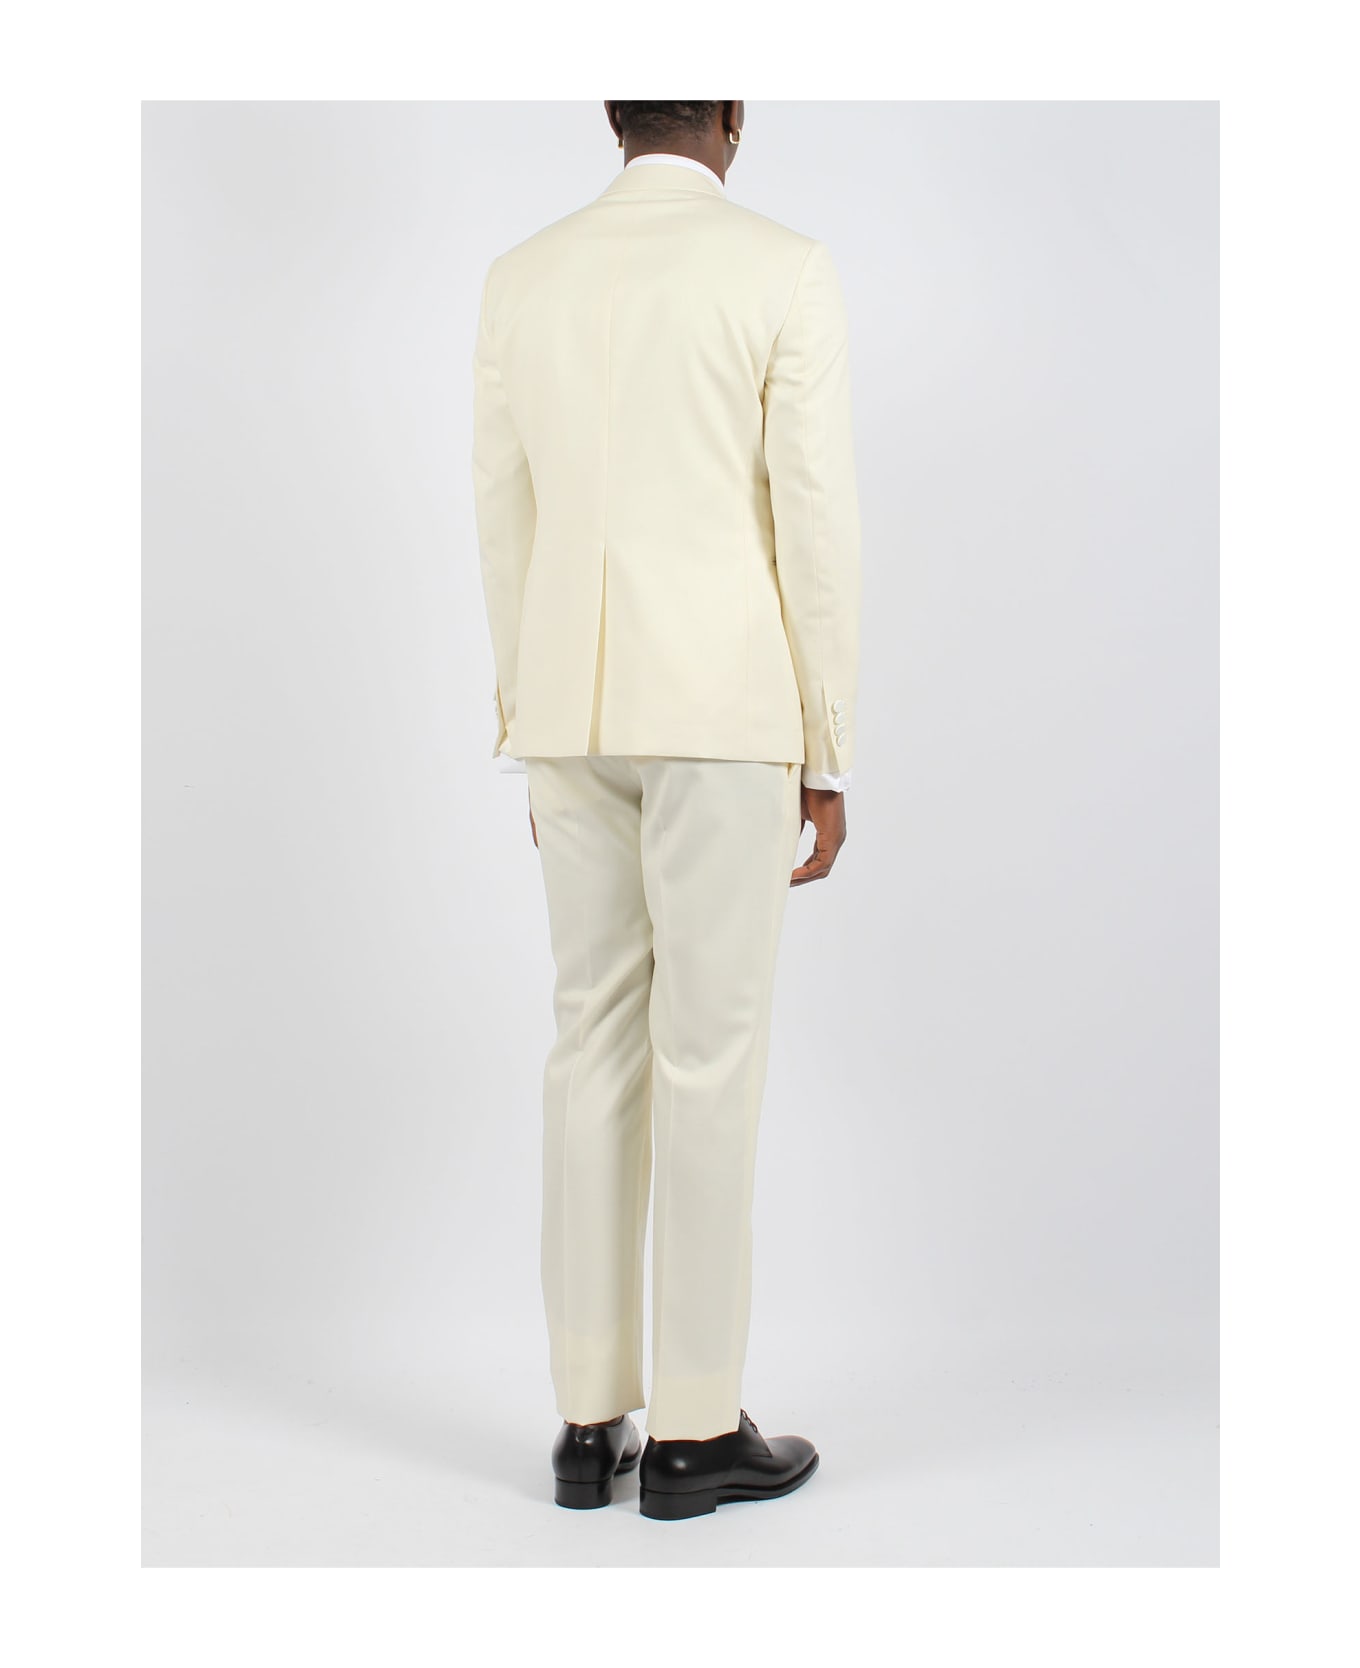 Tagliatore 3 Pieces Single Breasted Tailored Suit - White